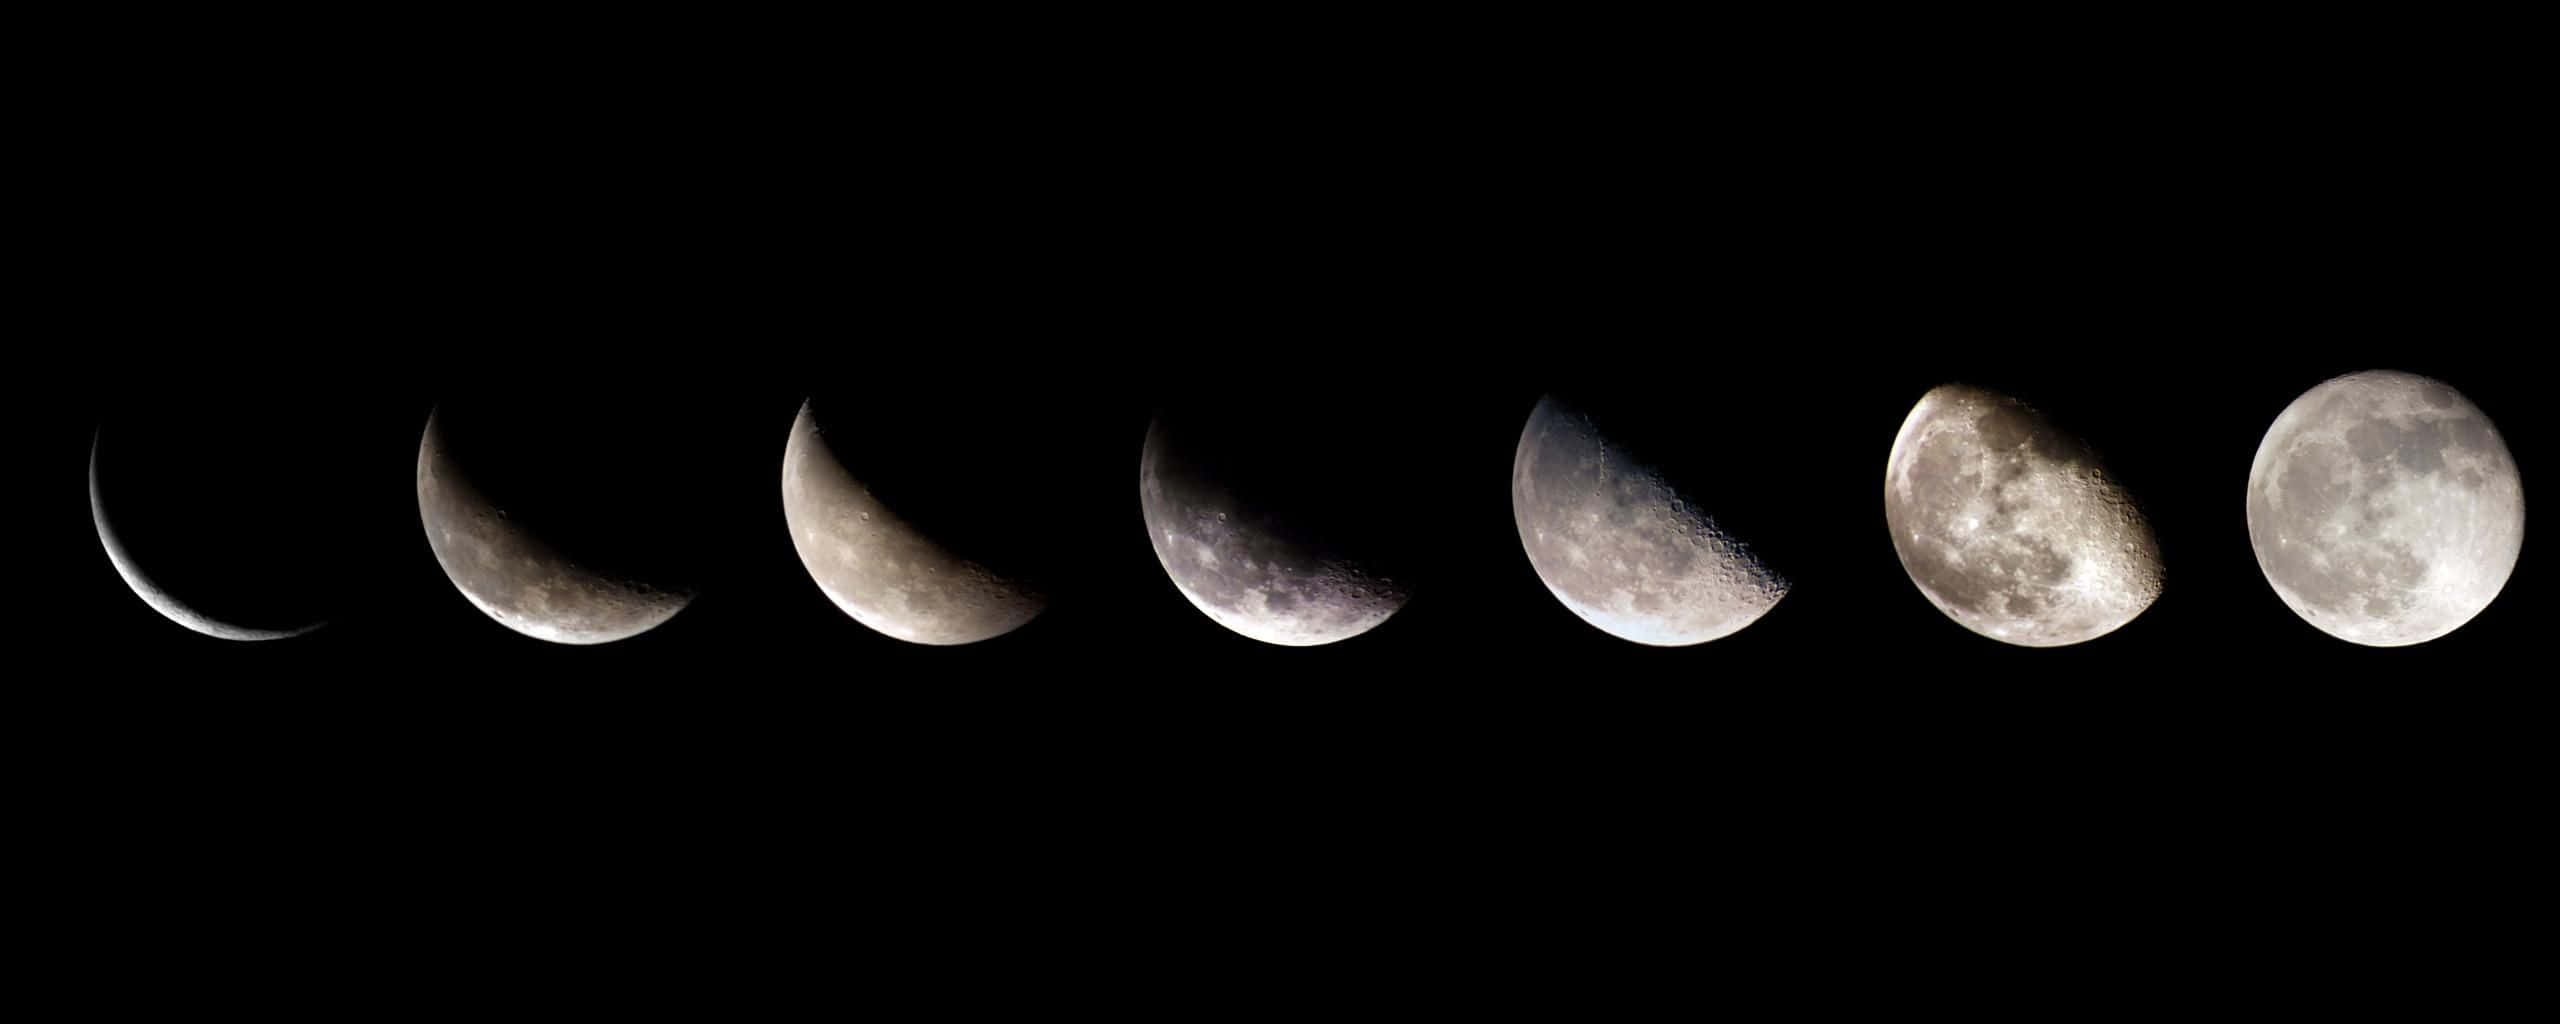 A Mesmerizing Display of Moon Phases